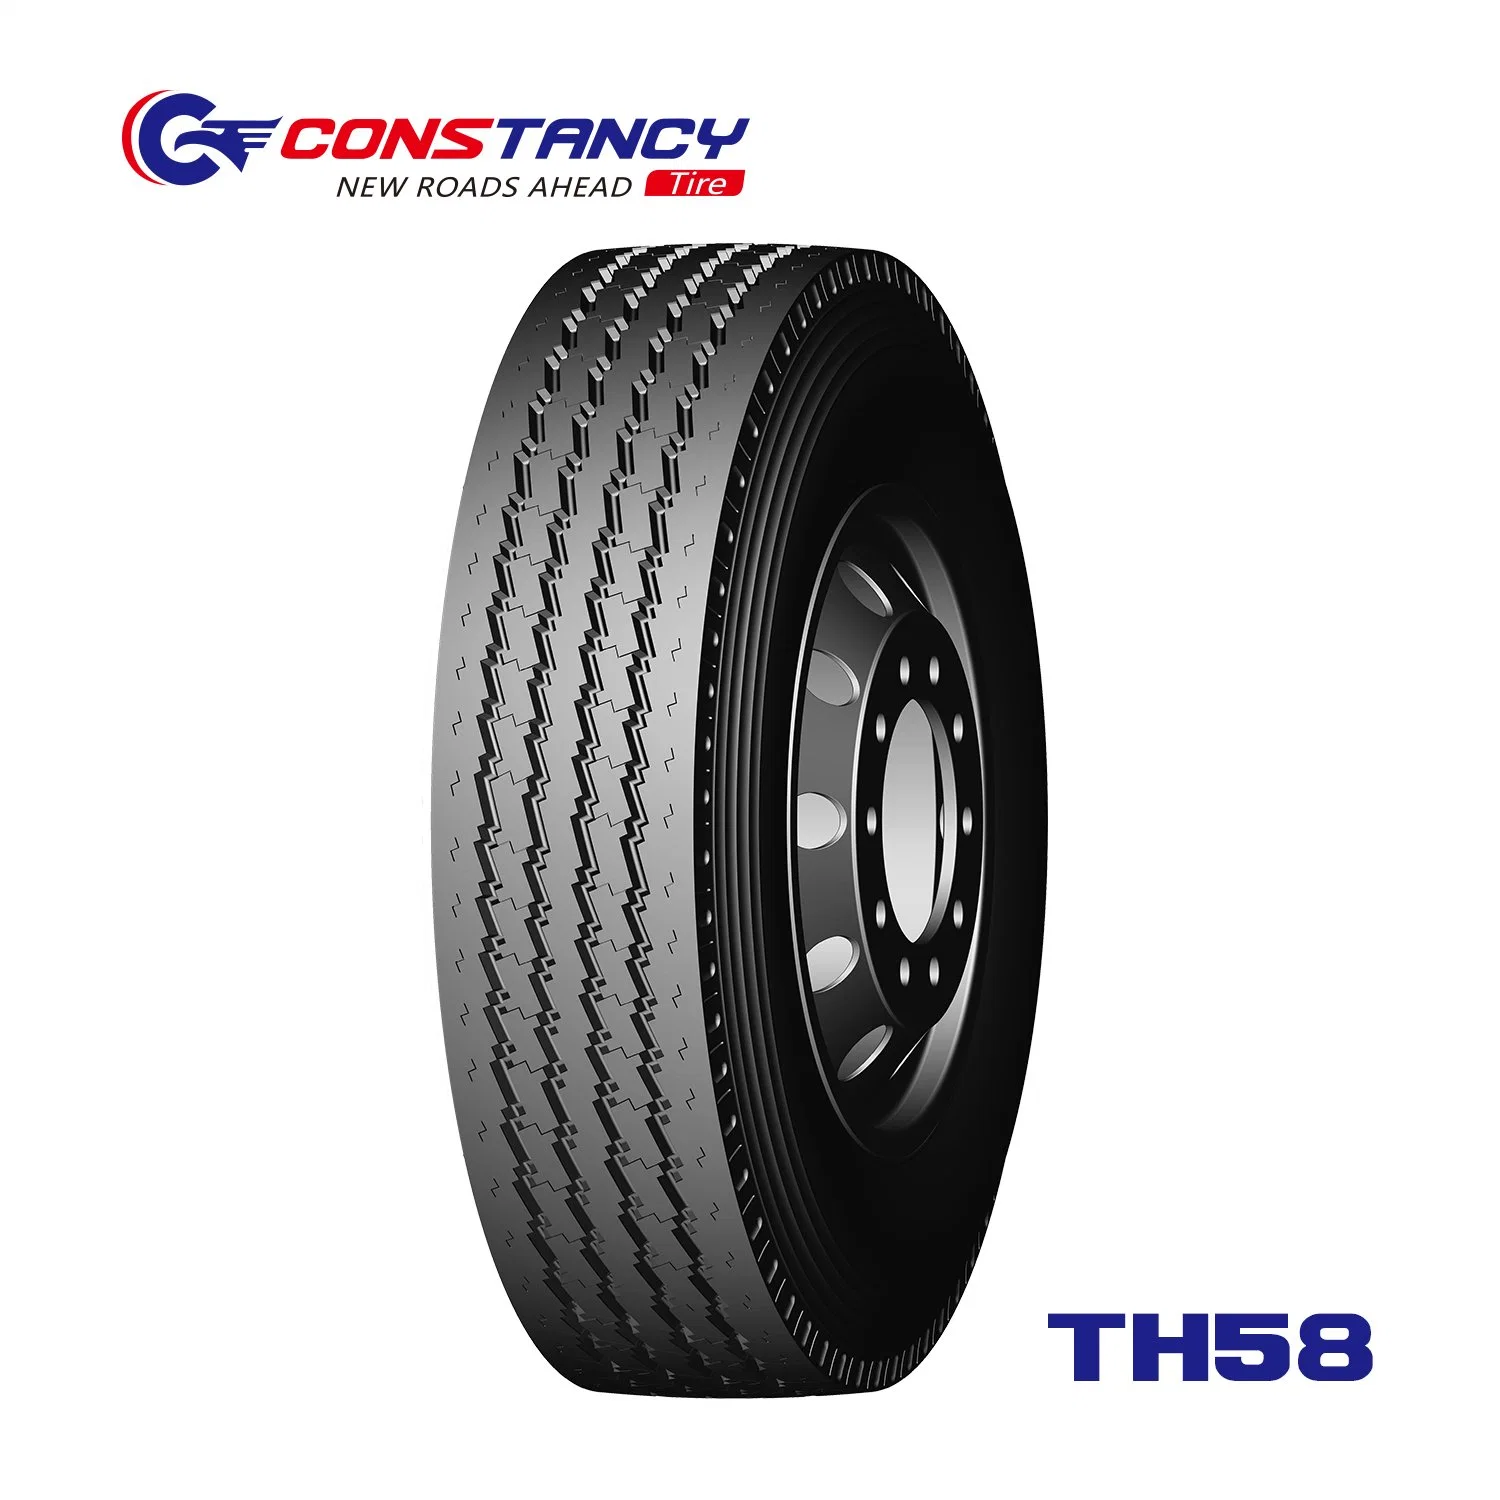 All Steel Radial Truck Tire TBR Tire and Bus Tires, Truck Tyre (12R22.5 315/80R22.5)